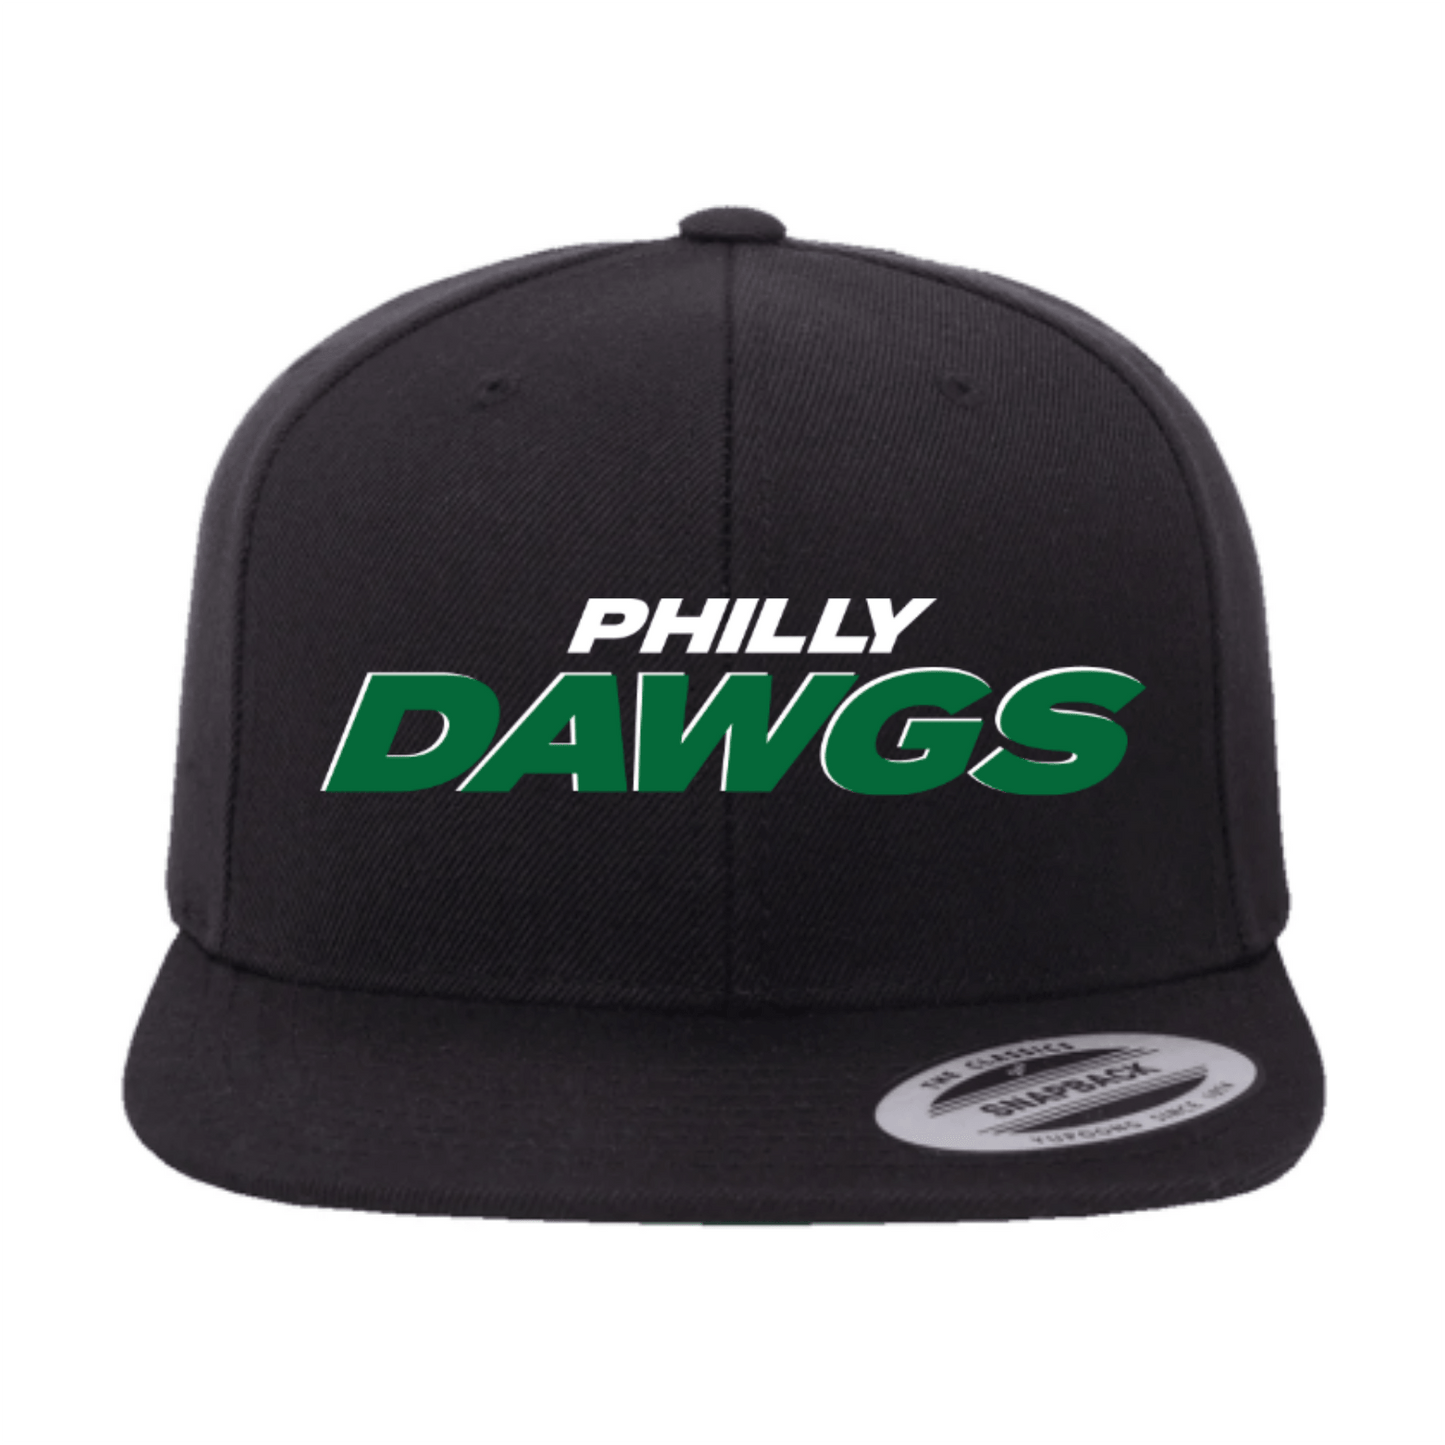 Philly Dawgs Hat